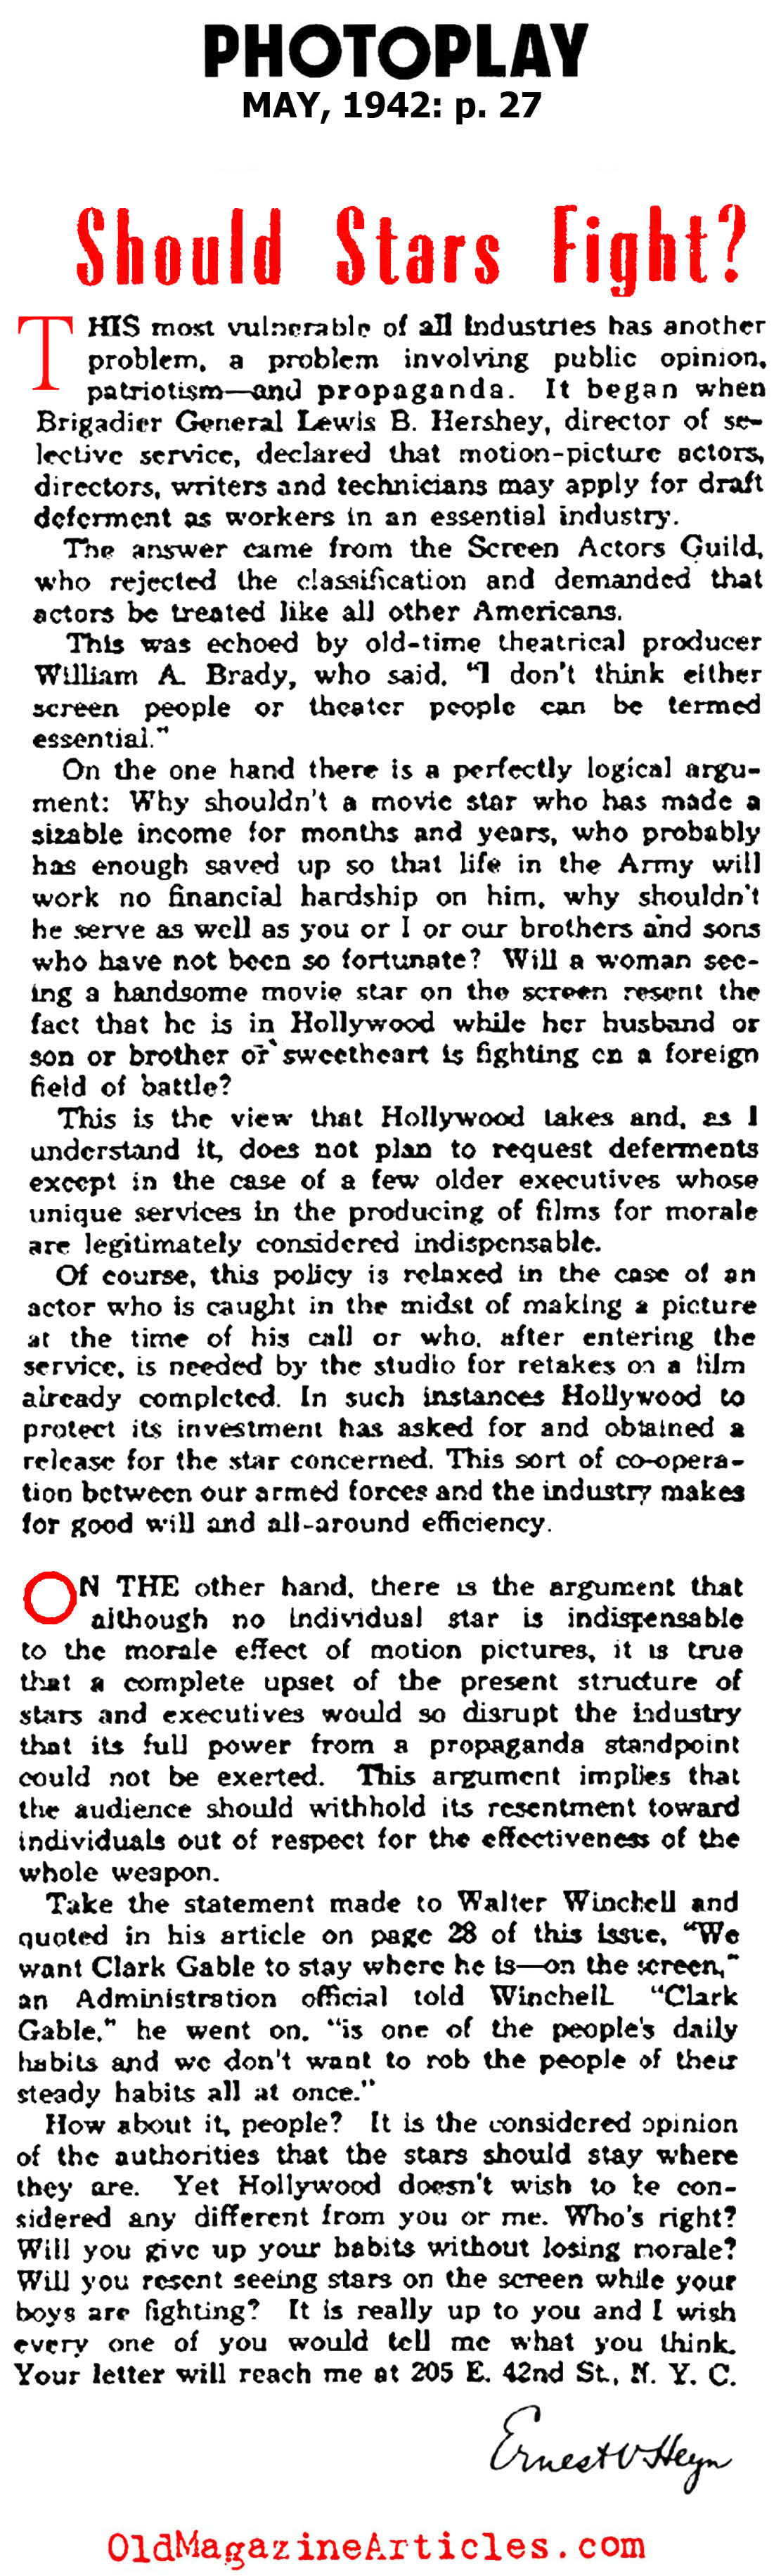 Should Movie Stars Be Expected to Fight, As Well? (Photoplay Magazine, 1942)